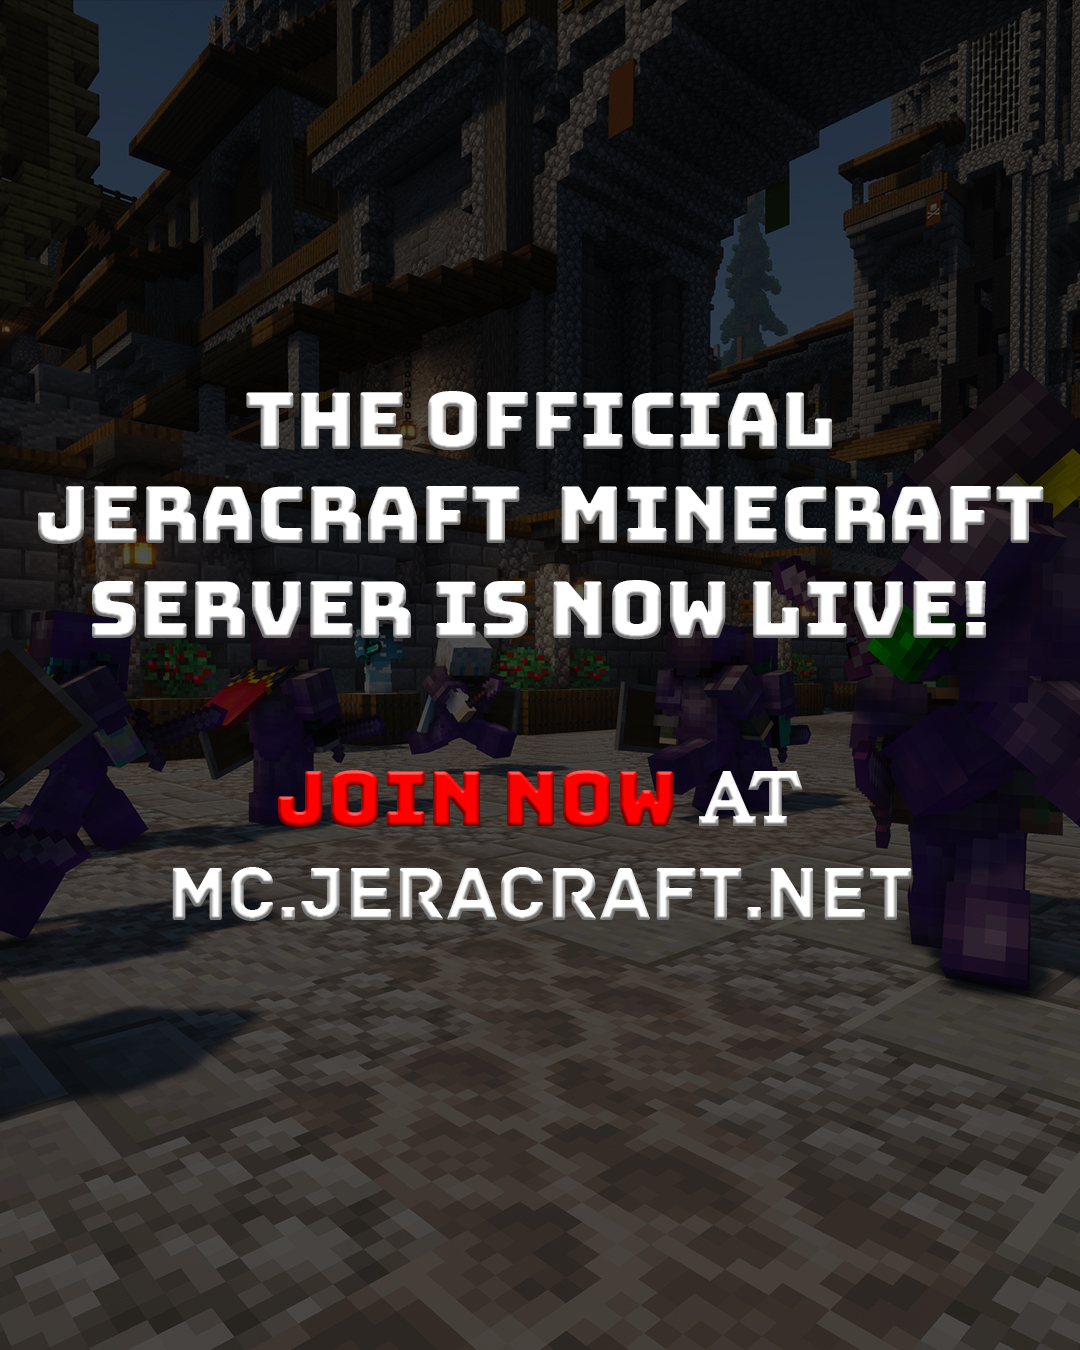 Opera GX on X: We have a brand new #Minecraft server, and we're